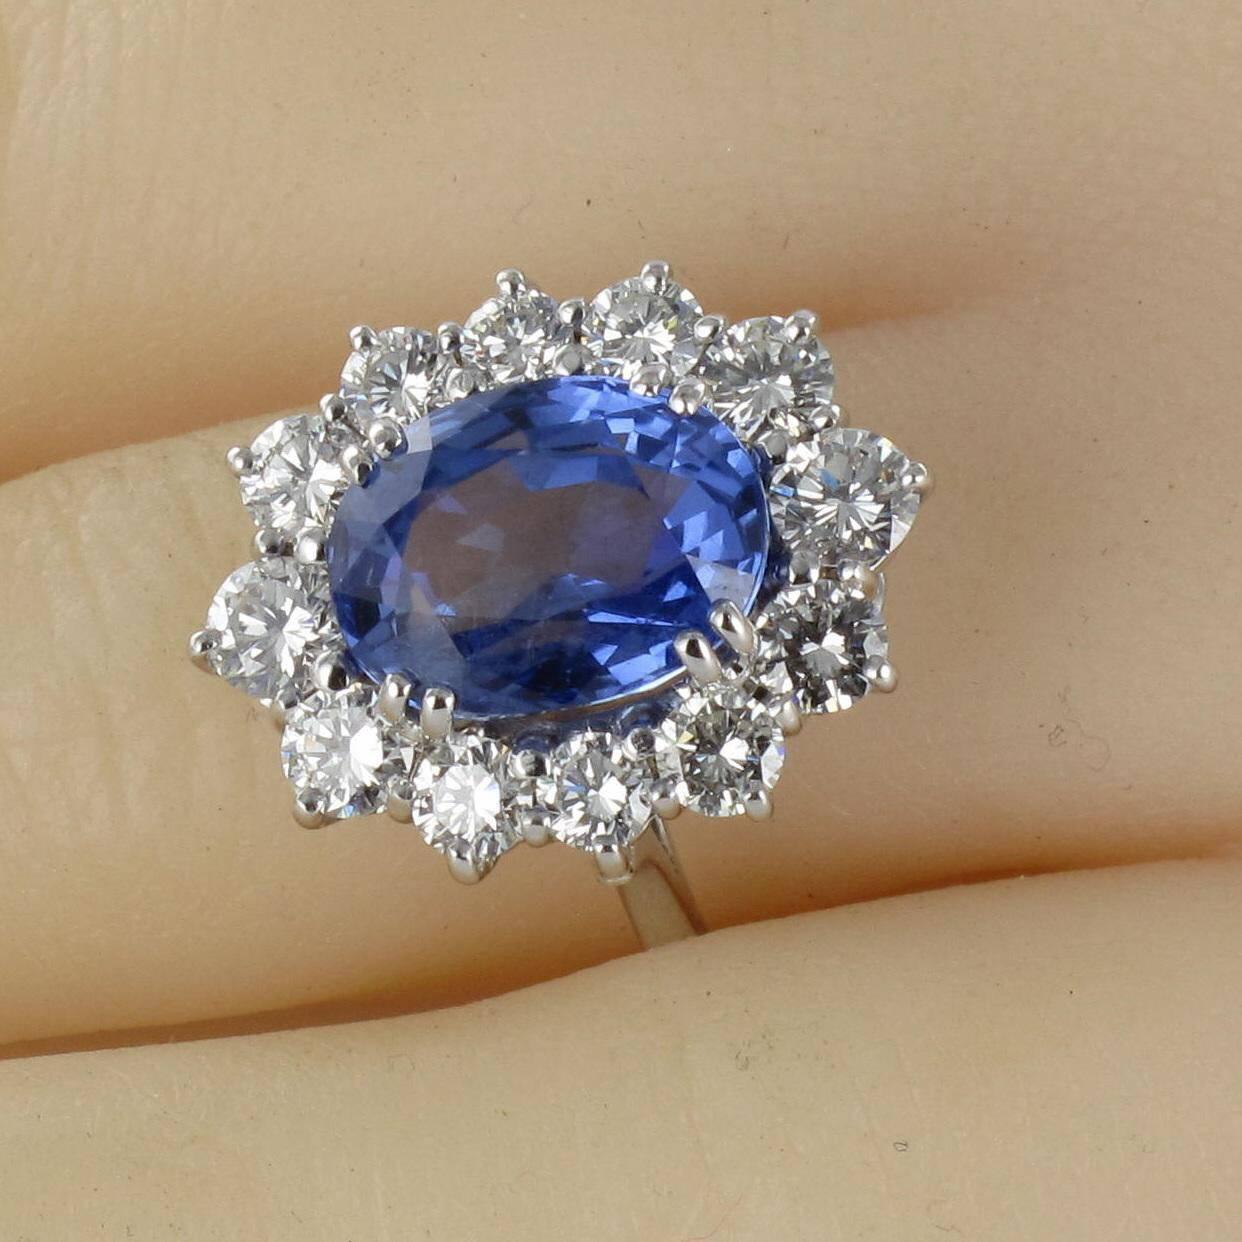 French 1960s No Heat 7.42 Carat Ceylon Sapphire Diamond White Gold Cluster Ring For Sale 10